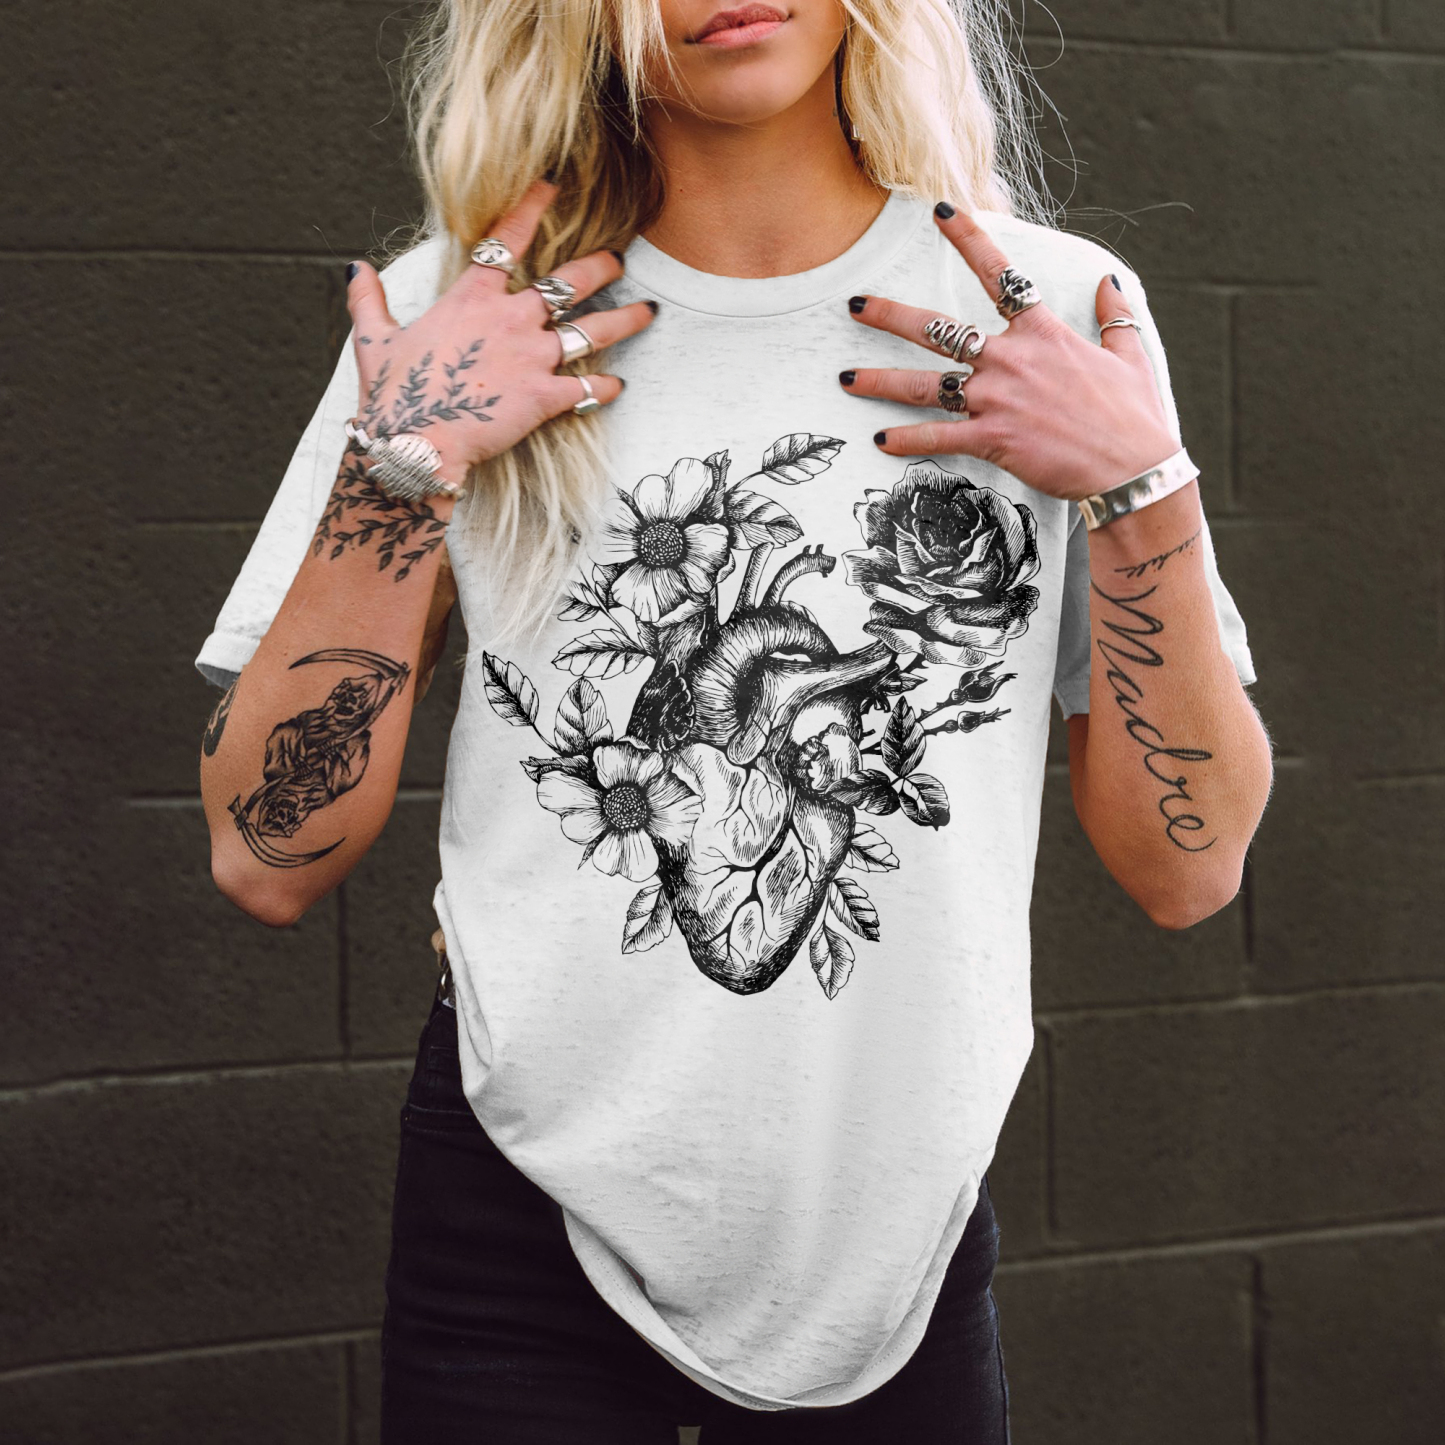 Flowers Growing From The Heart Print Women's T-shirt